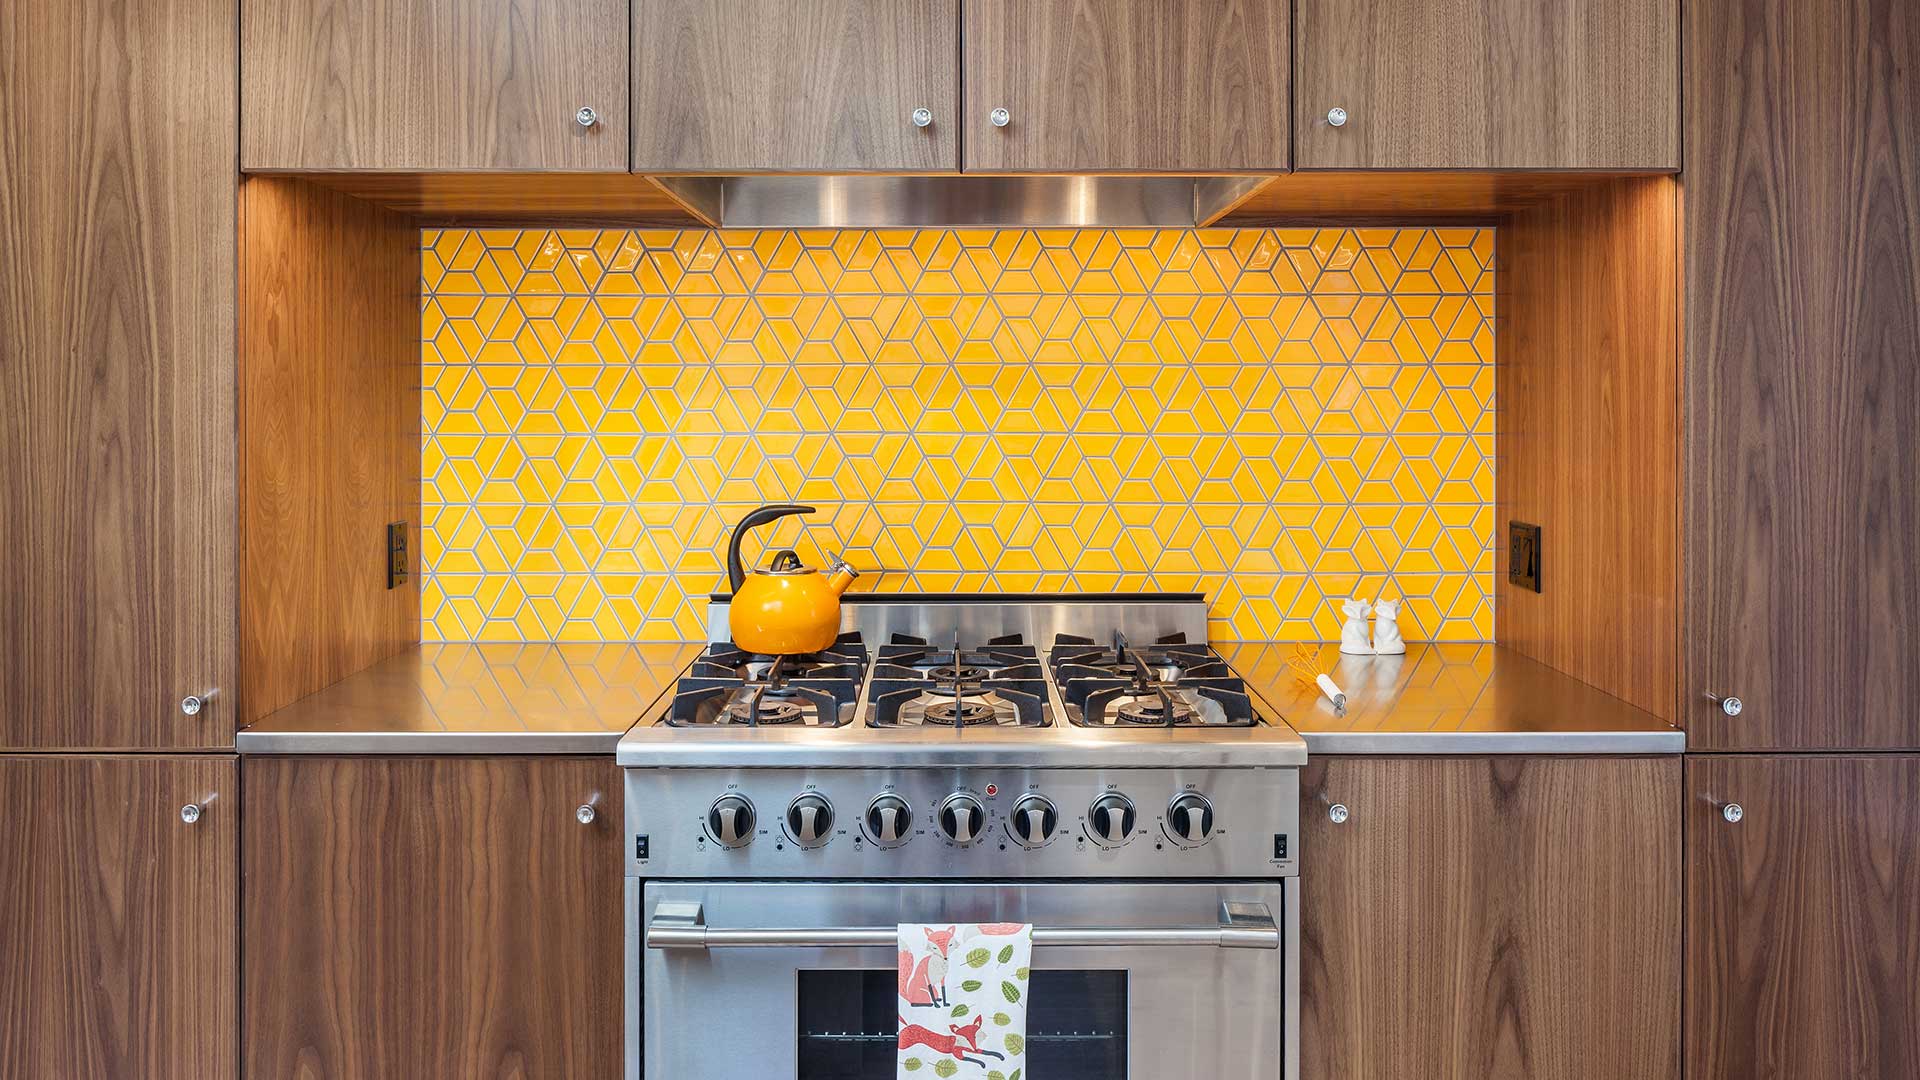 A bright orange-colored tile backsplash sits behind the stainless steel gas range at the Hawkridge Modern. The surrounding cabinets are plain-sliced walnut. The countertop is stainless steel.